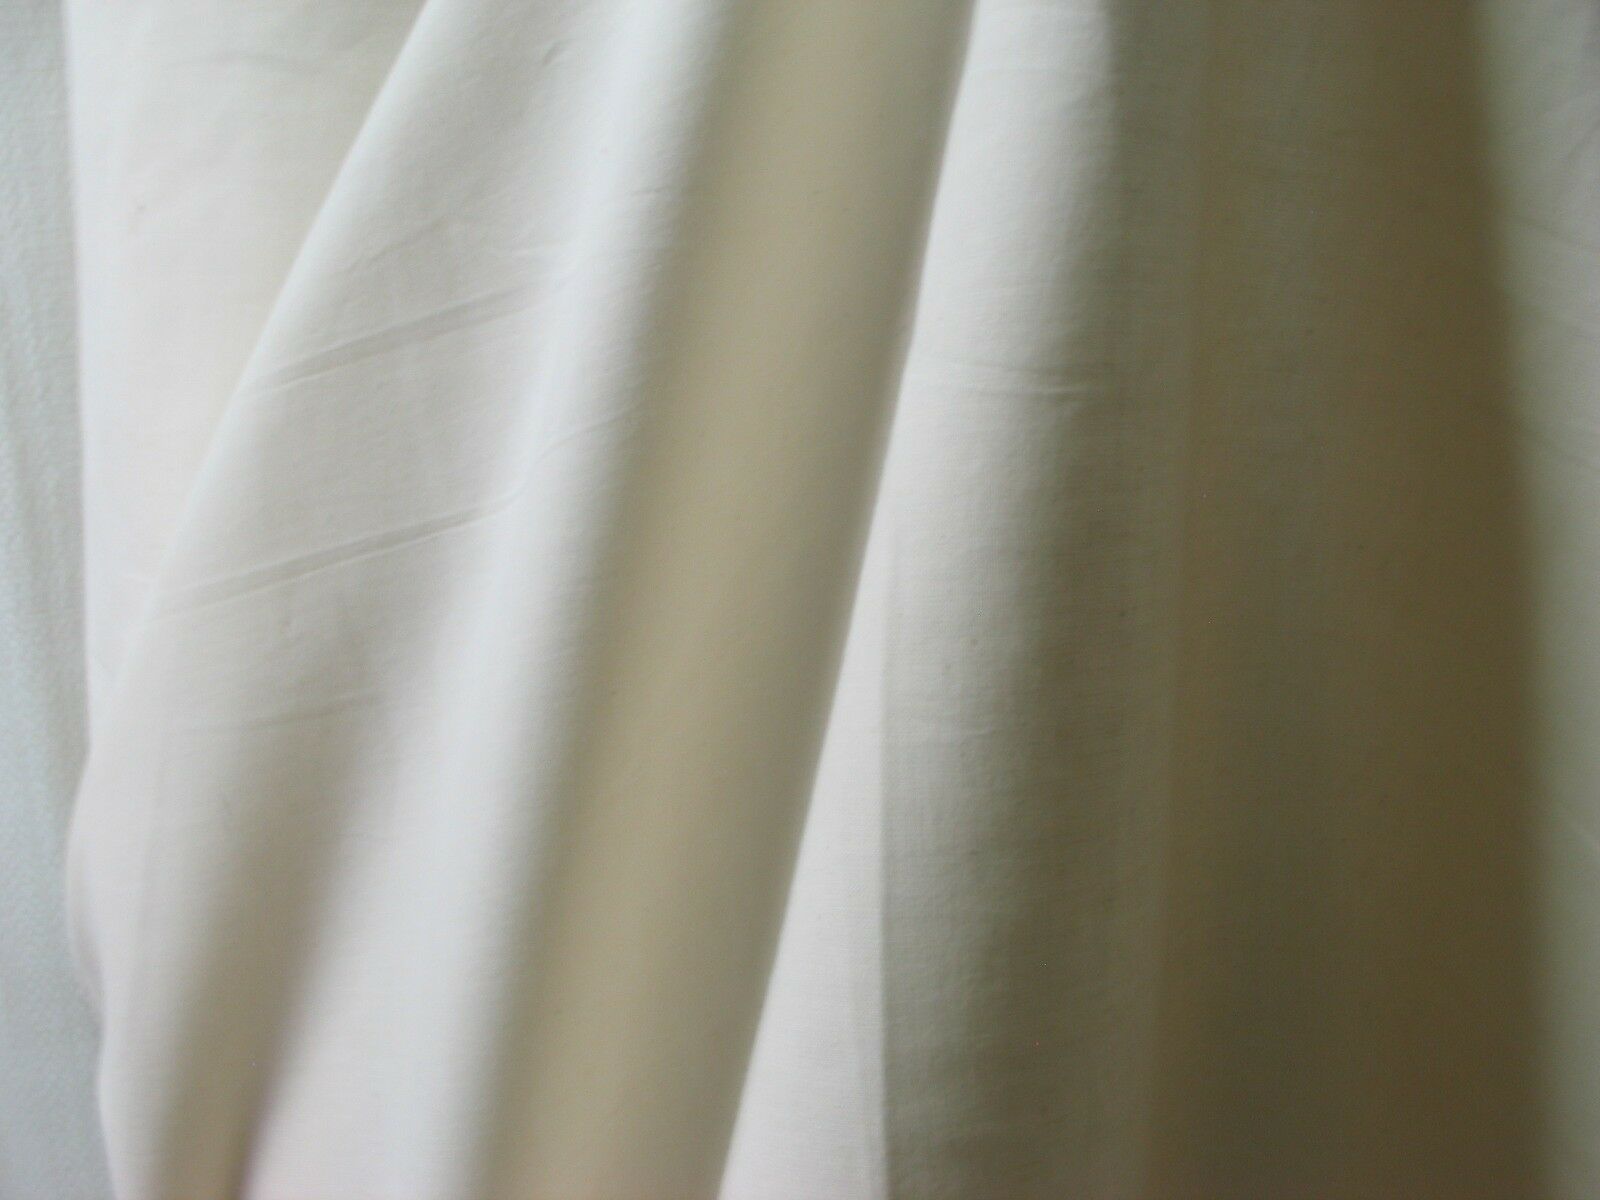 Muslin Natural 100% Cotton Heavy Quality Unbleached Fabric By The Yard 60" Wide